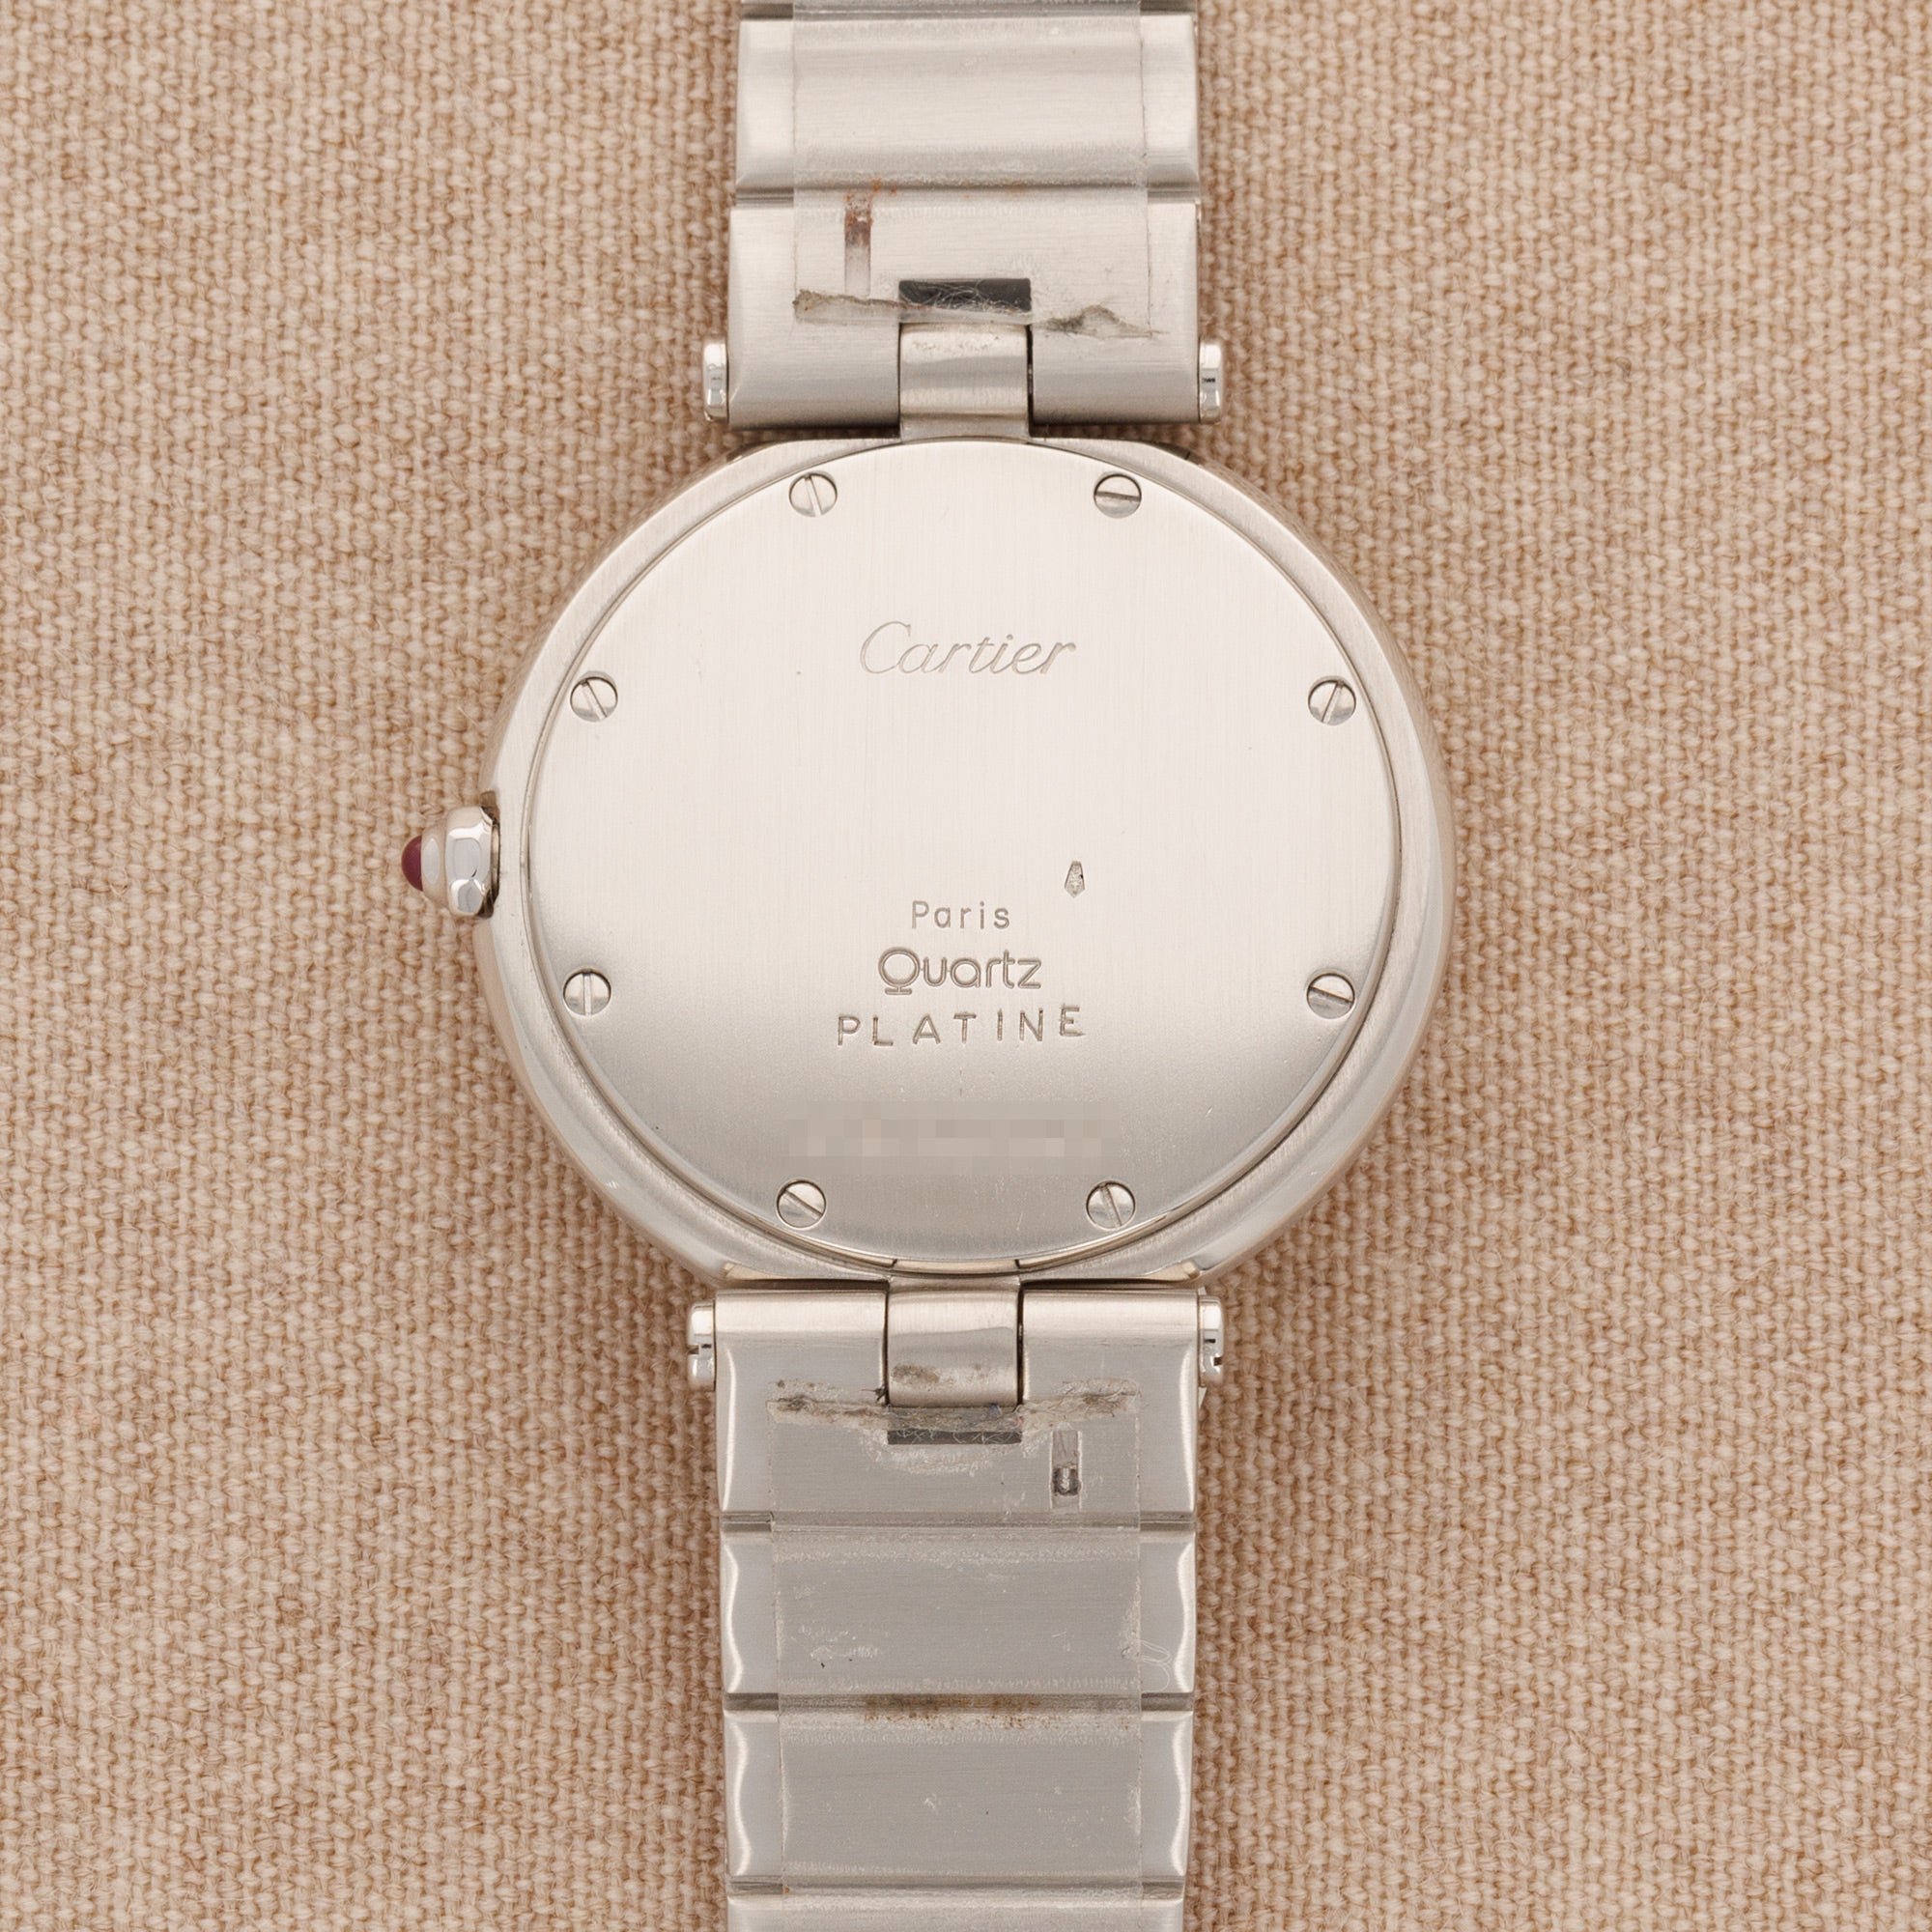 Cartier - Cartier Platinum VLC Watch with Original Red Dial - The Keystone Watches